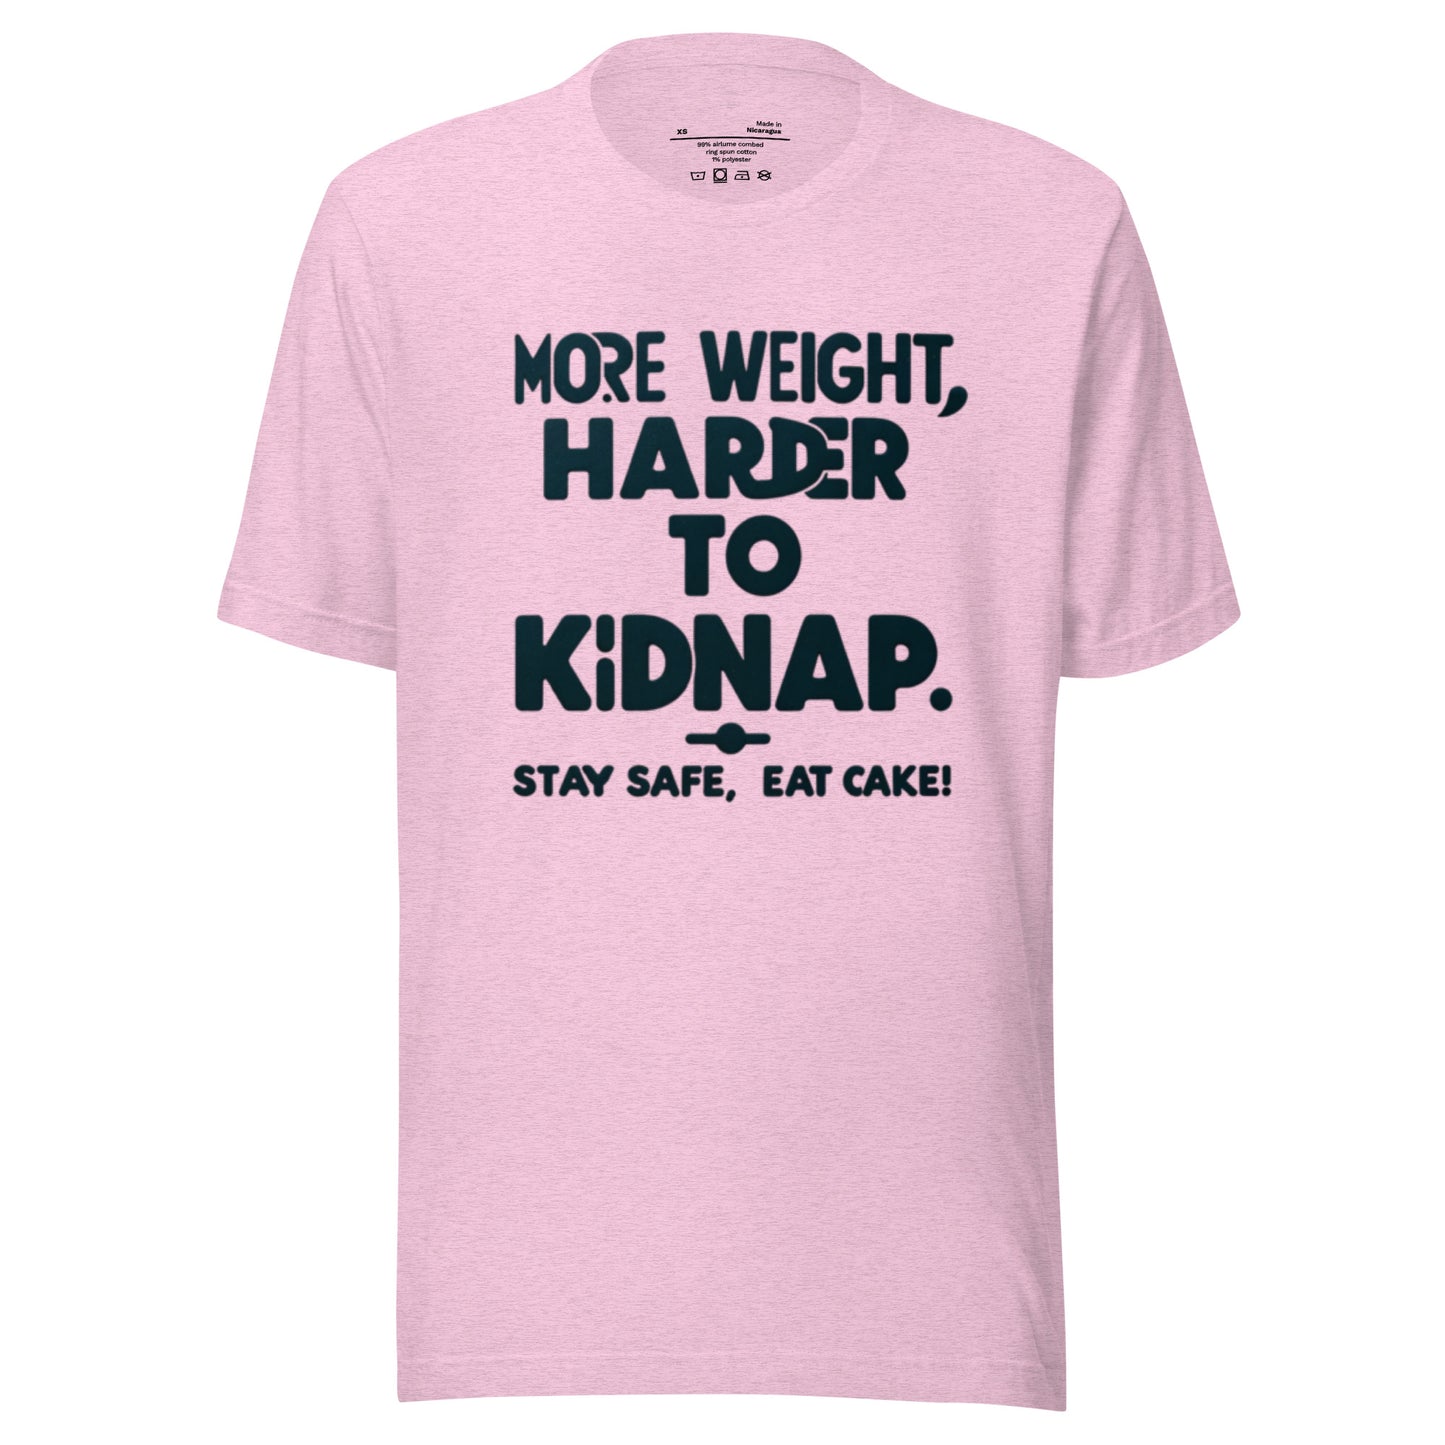 More weight, harder to kidnap. Stay safe, eat cake! - Unisex t-shirt